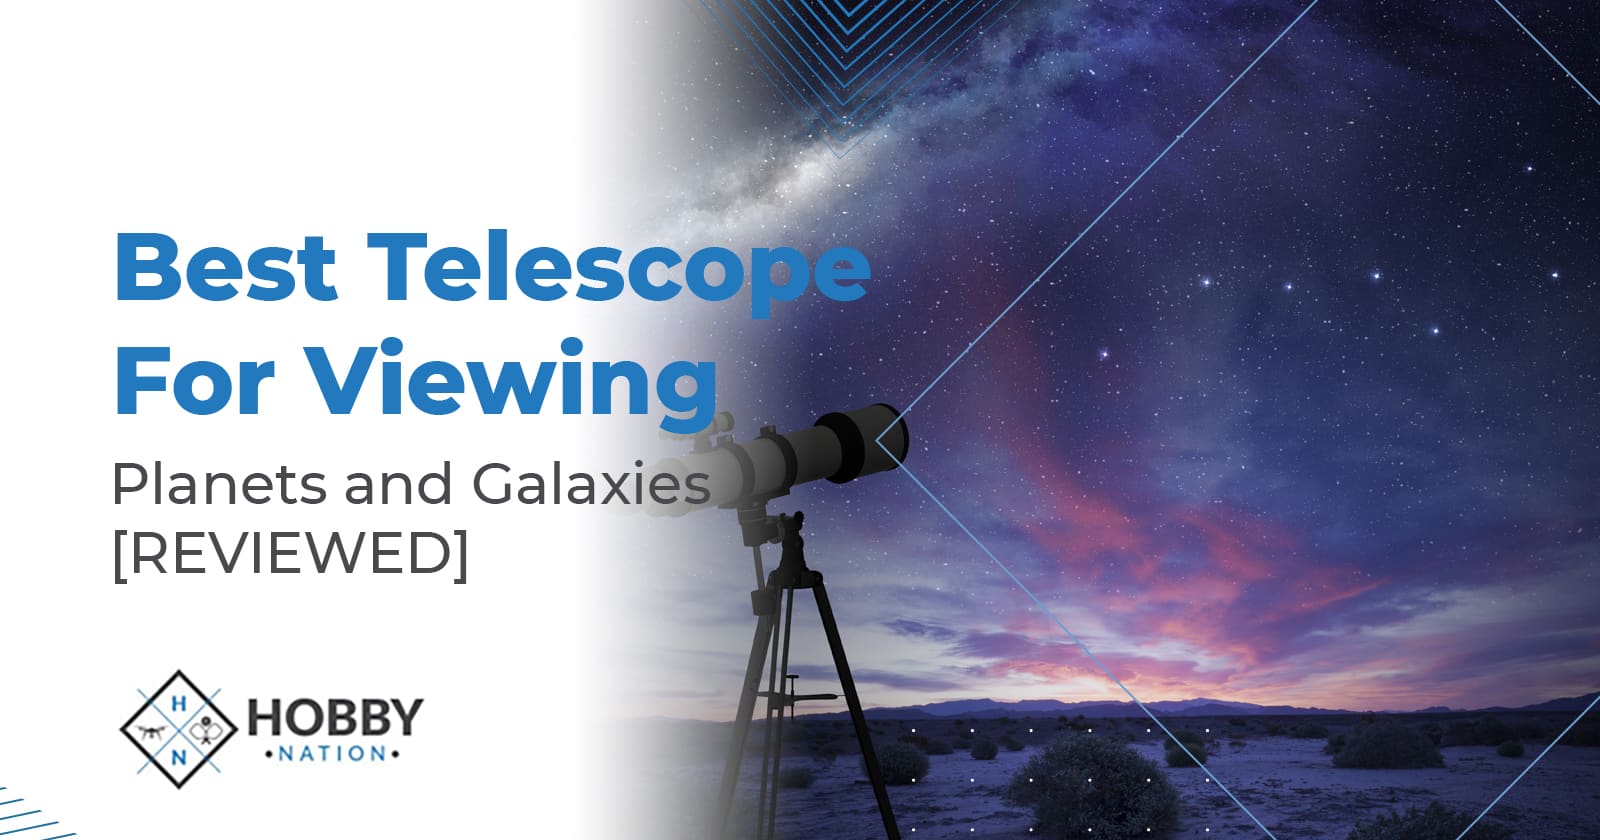 Best Telescope for Viewing Planets and Galaxies [REVIEWED]